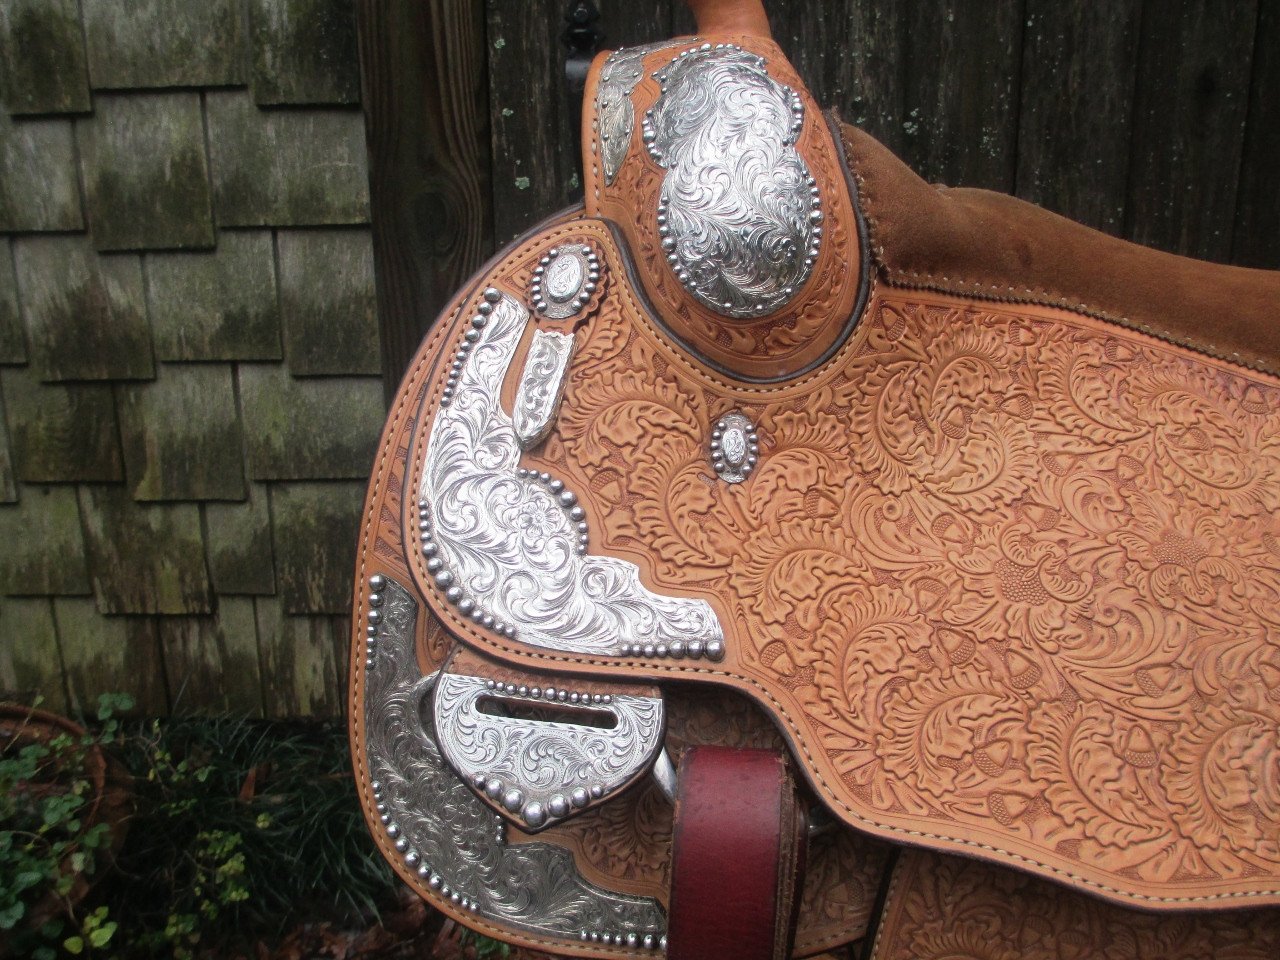 how to read blue ribbon saddle serial numbers